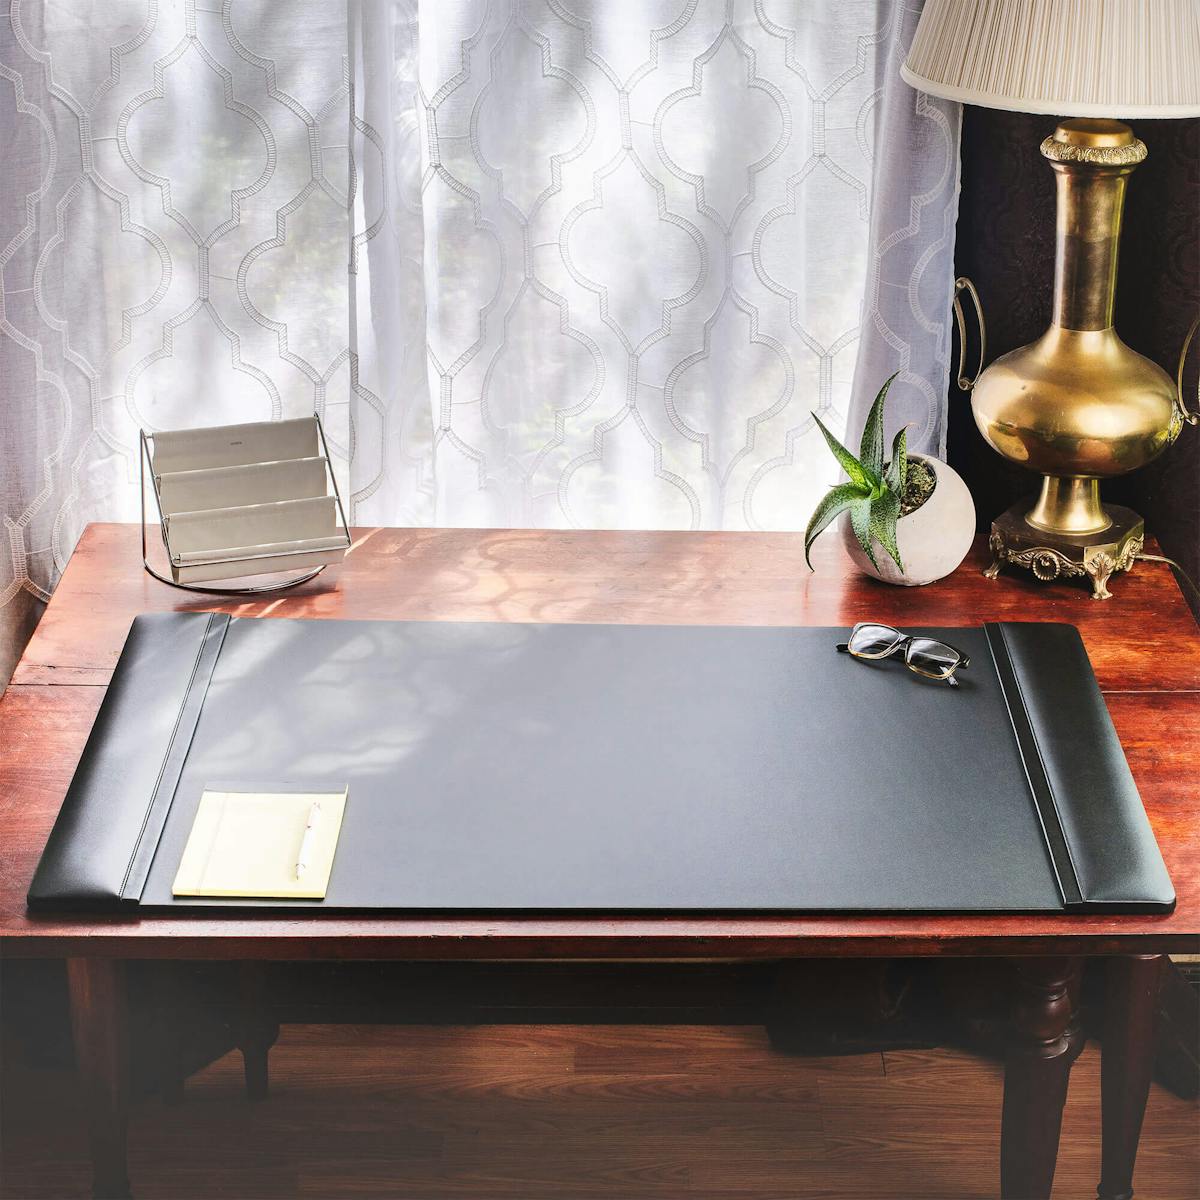 The Elegant Office  Office Executive Leather Conference Pads, Desk Pads &  Accessories